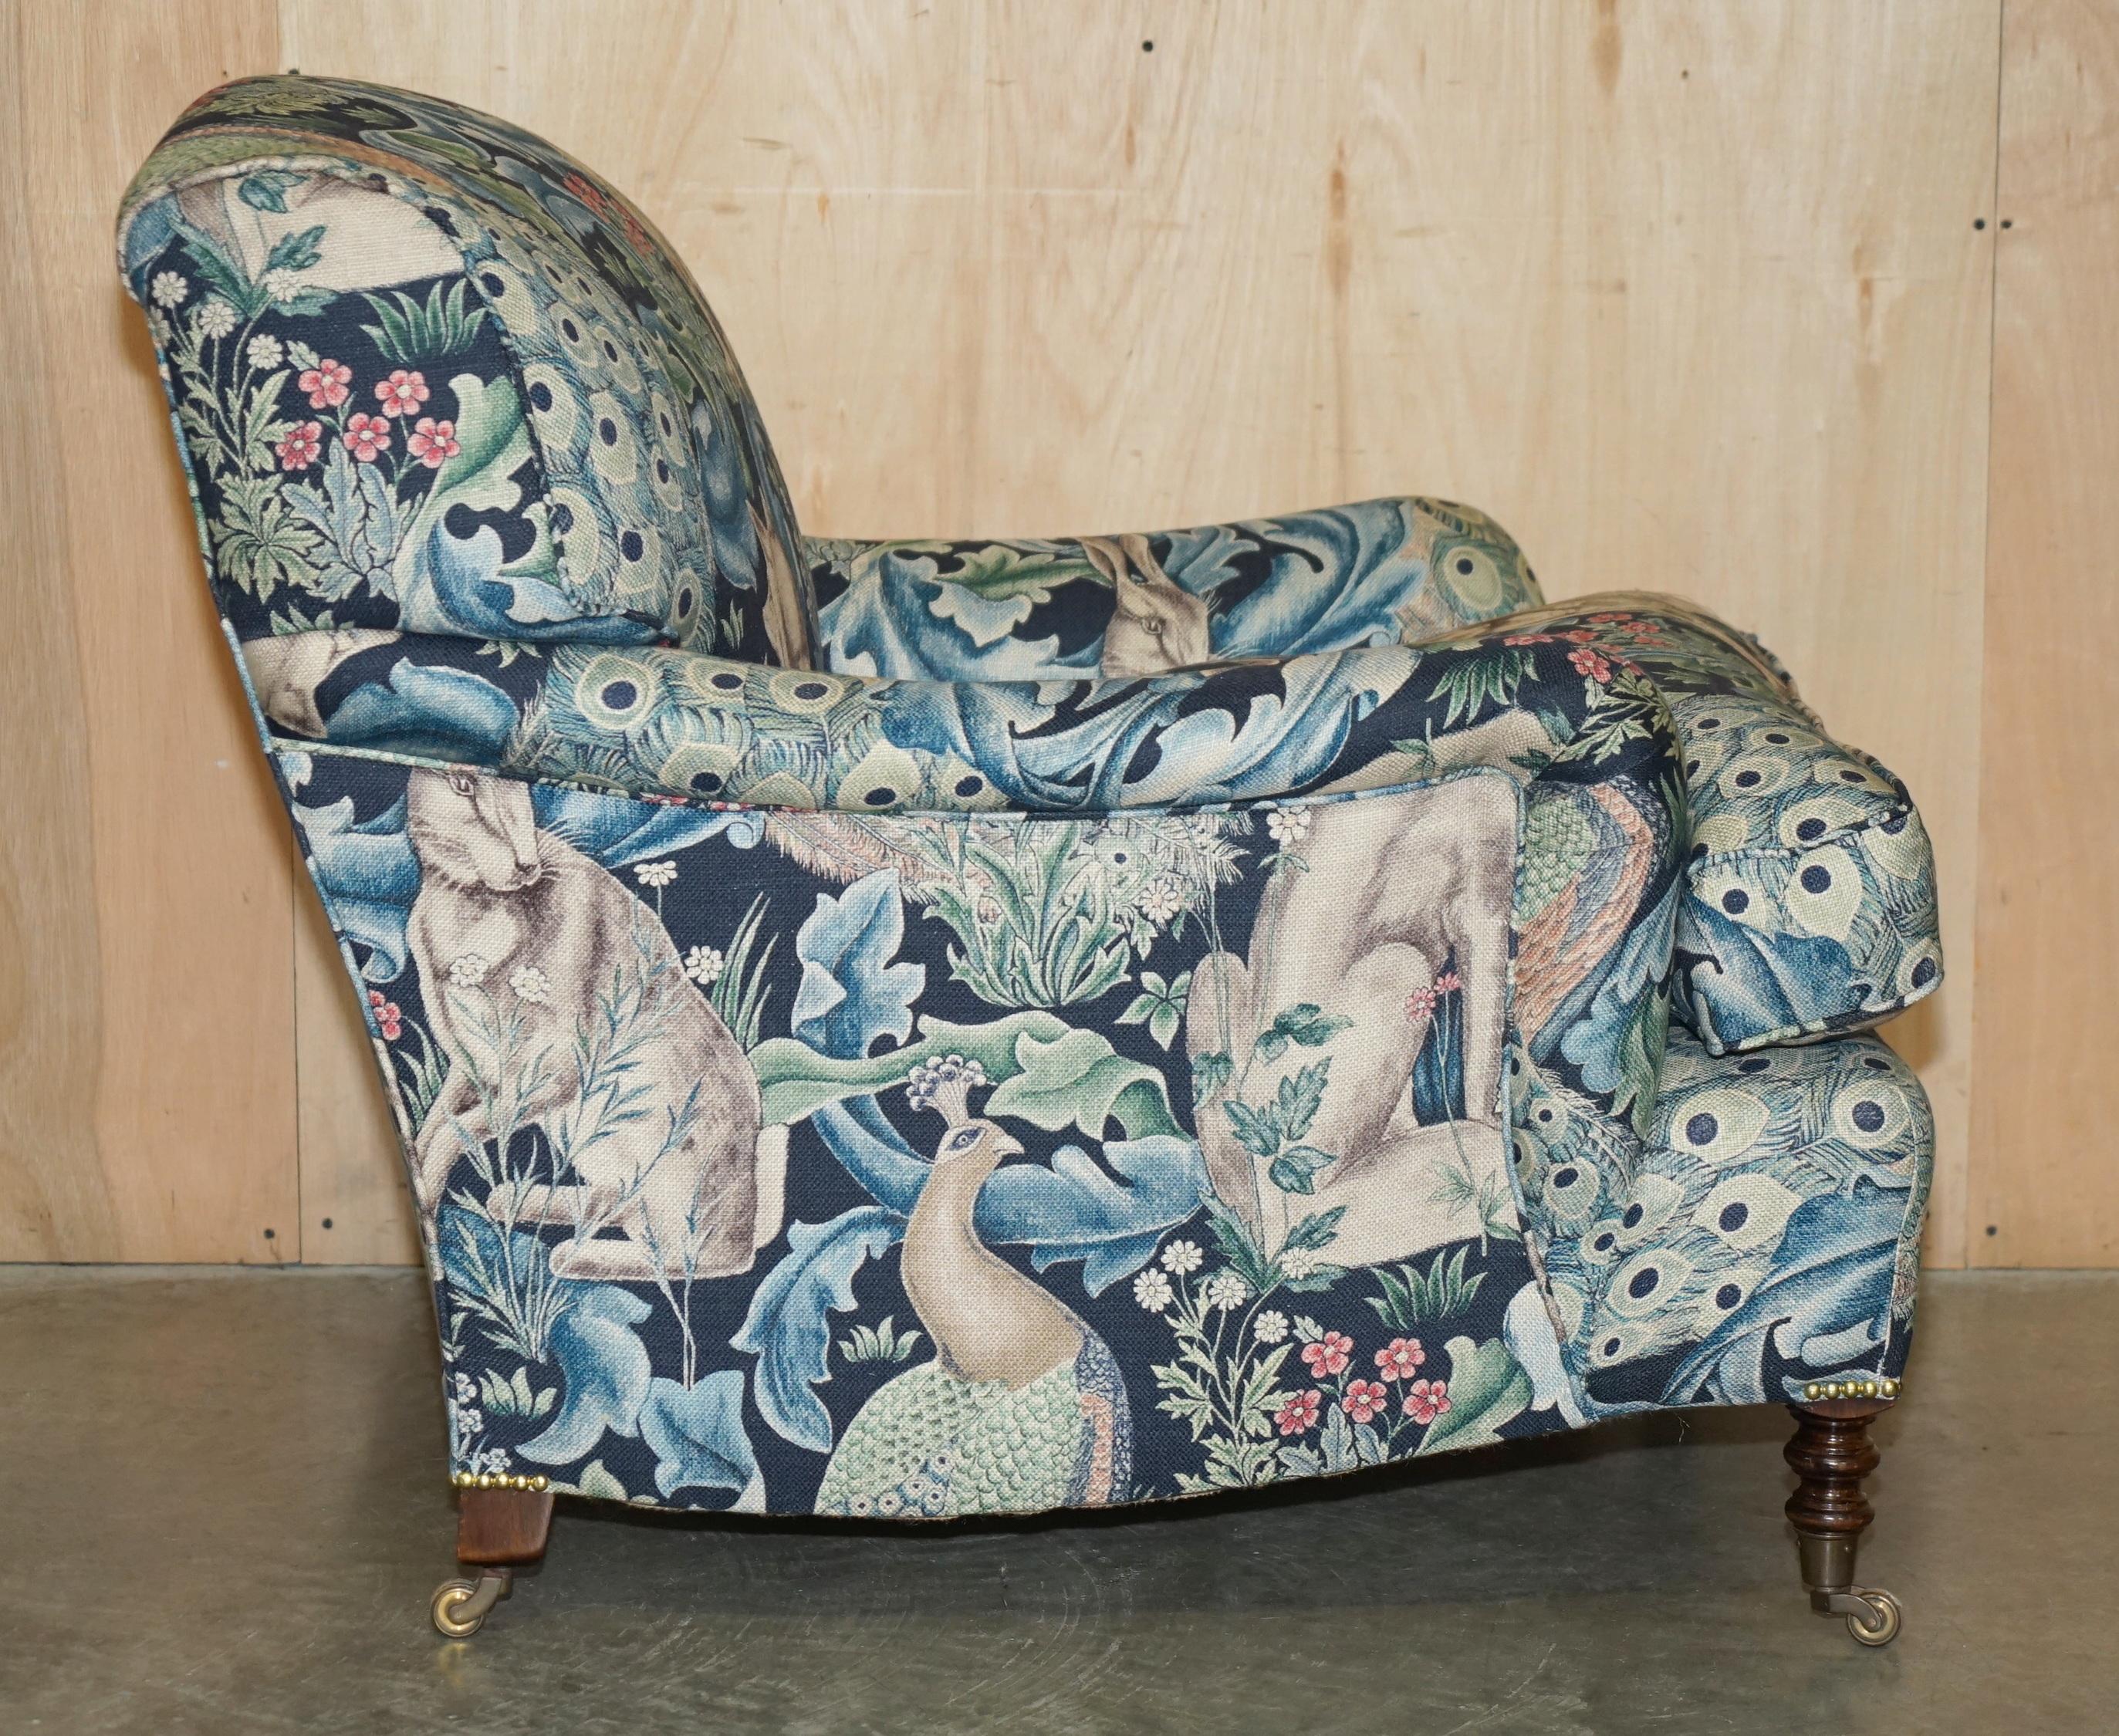  GEORGE SMiTH HOWARD & SON'S WILLIAM MORRIS SOFA ARMCHAIR SUITE For Sale 7